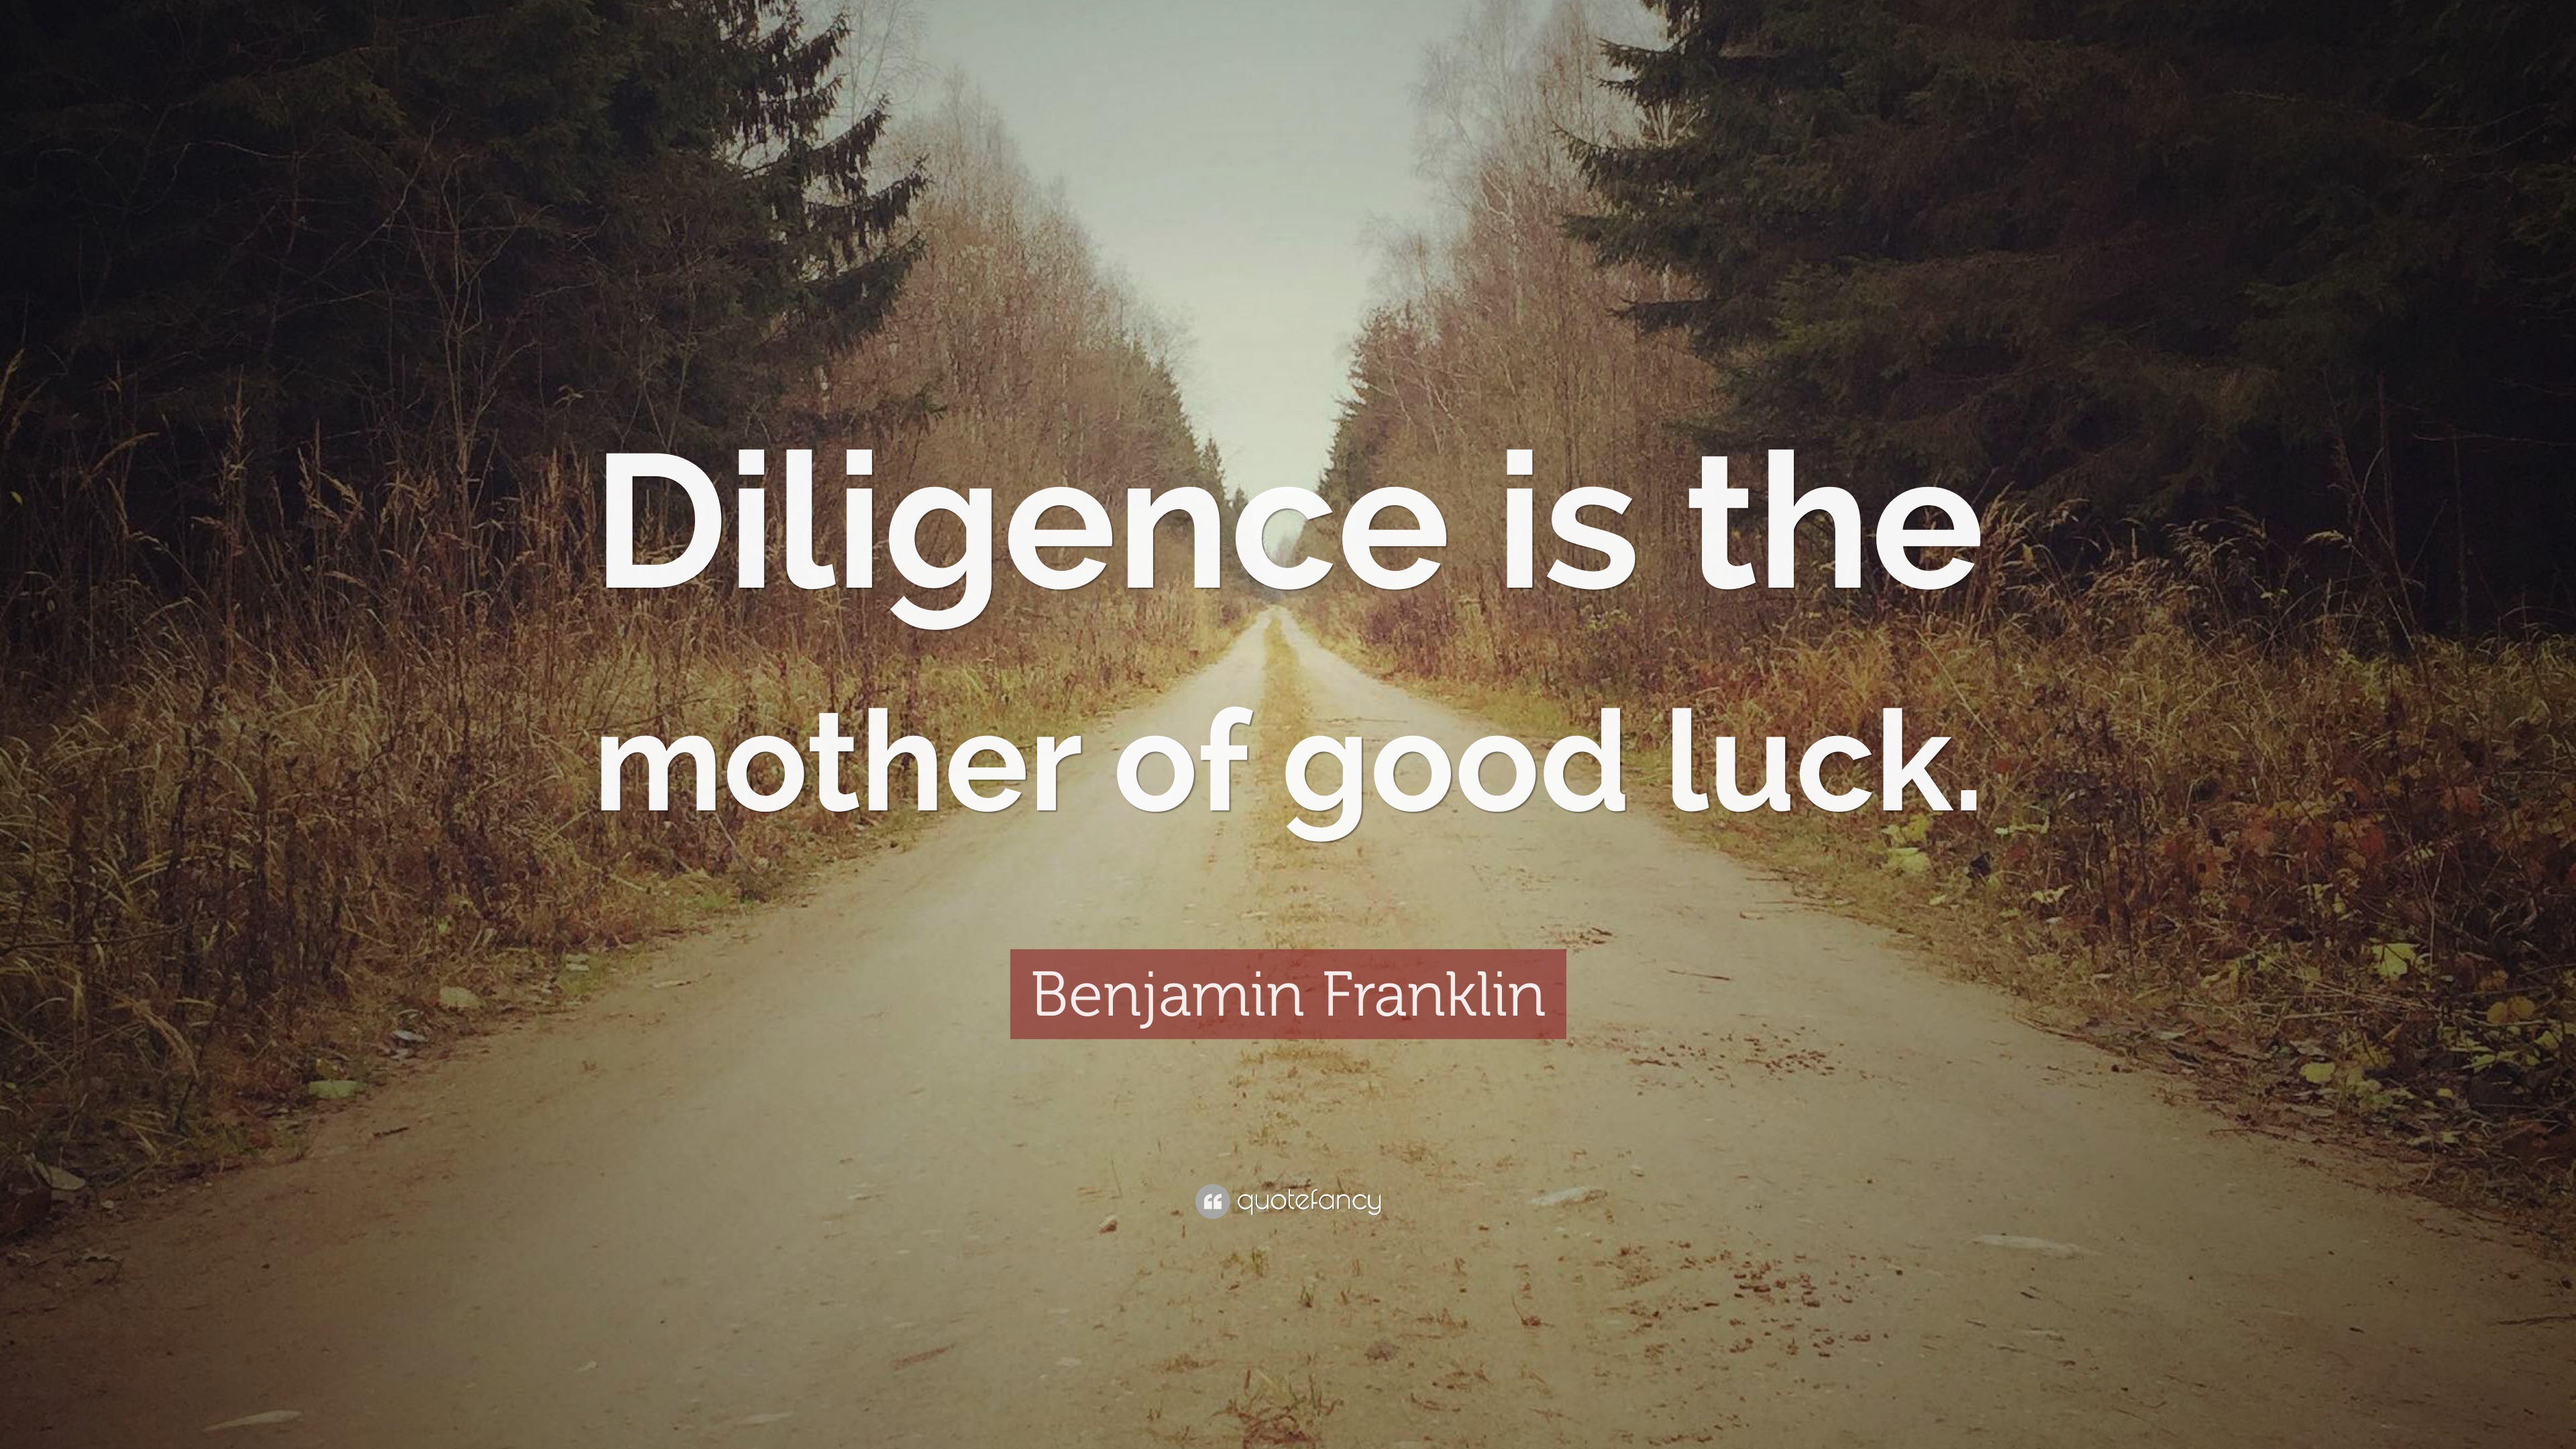 Benjamin Franklin Quote: “Diligence is the mother of good luck.” (25